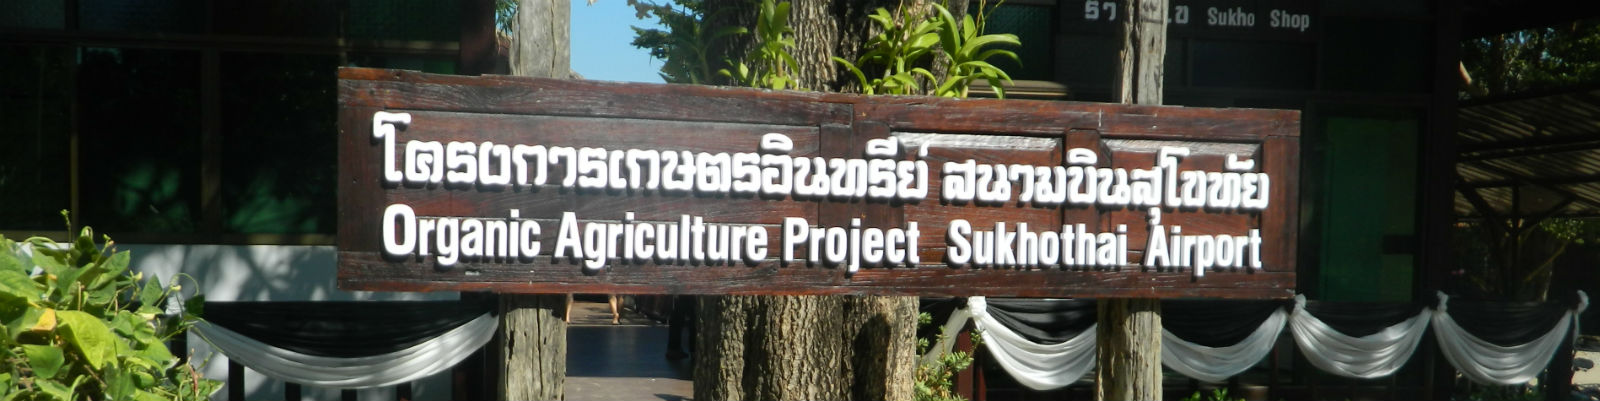 Organic Agricultural Project, Sukhothai Airport, Sukhothai Province